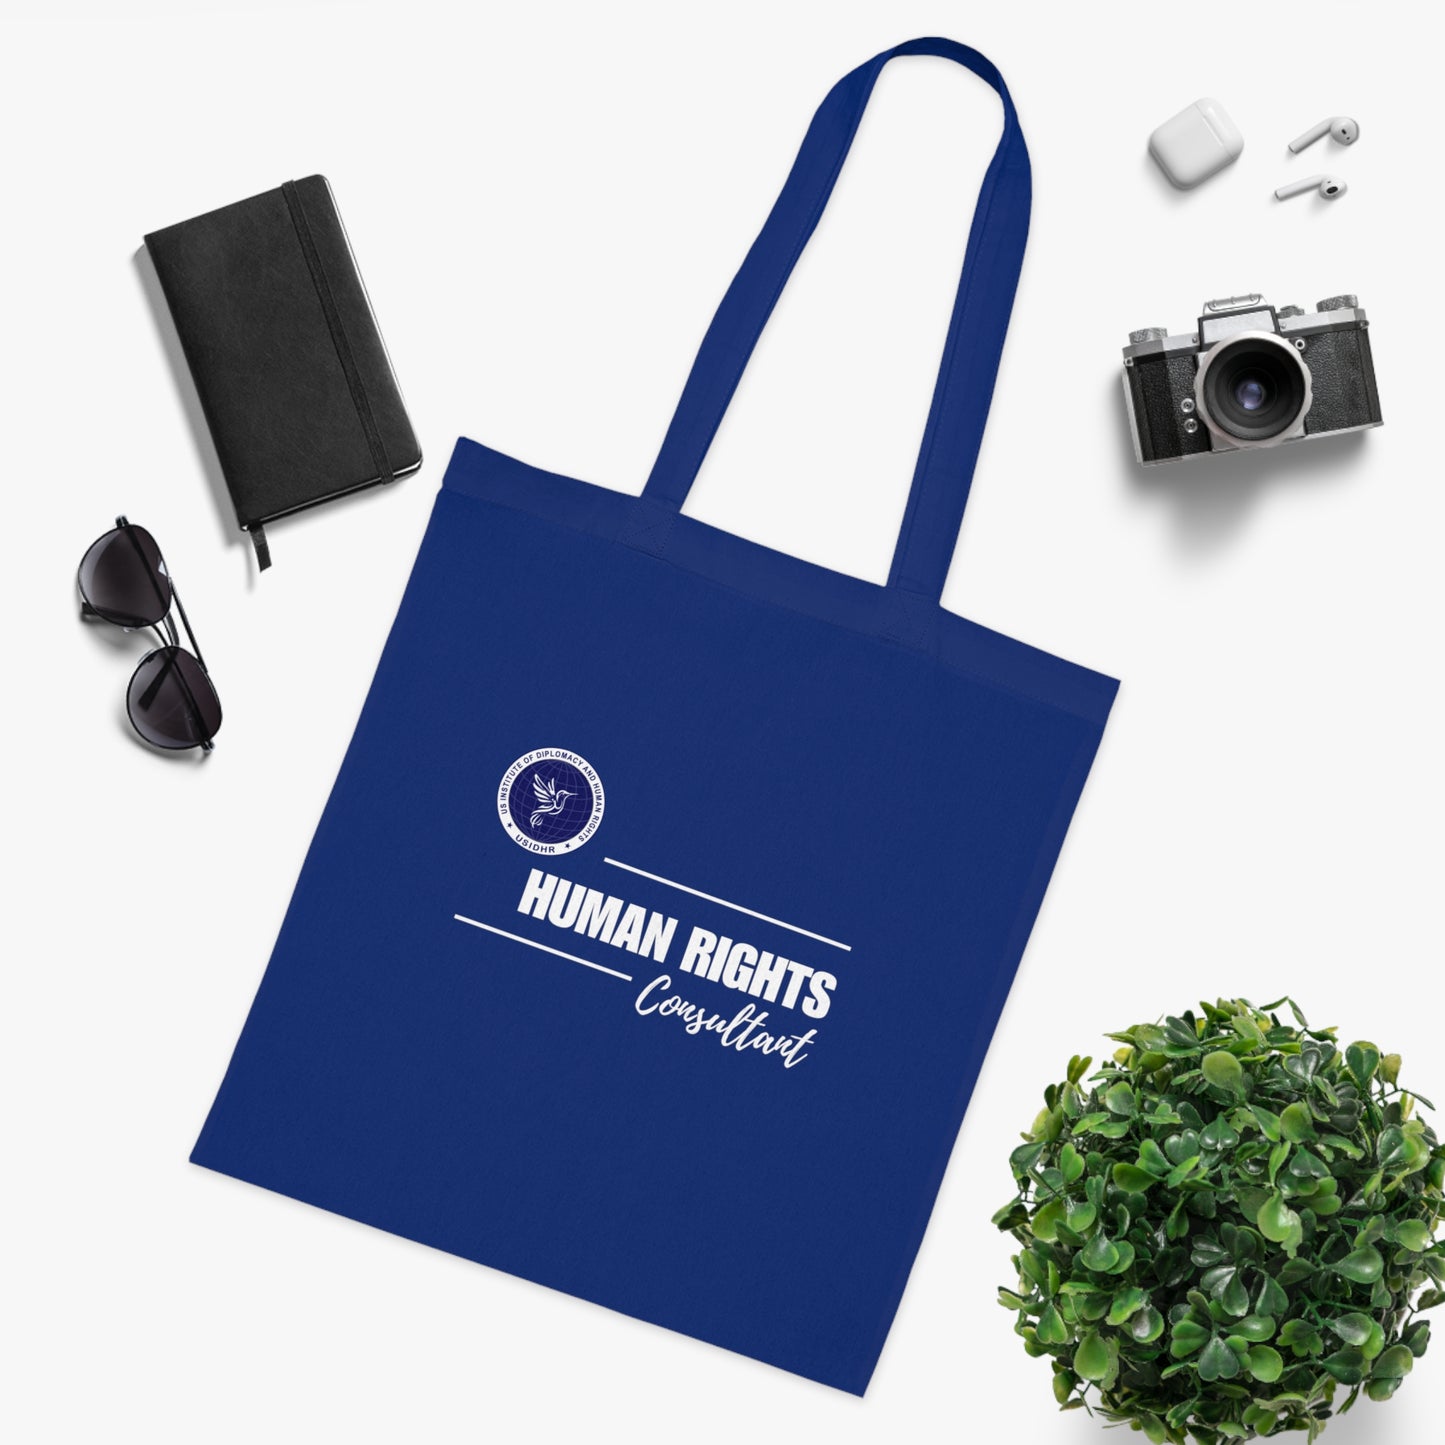 Human Rights Consultant Tote Bag